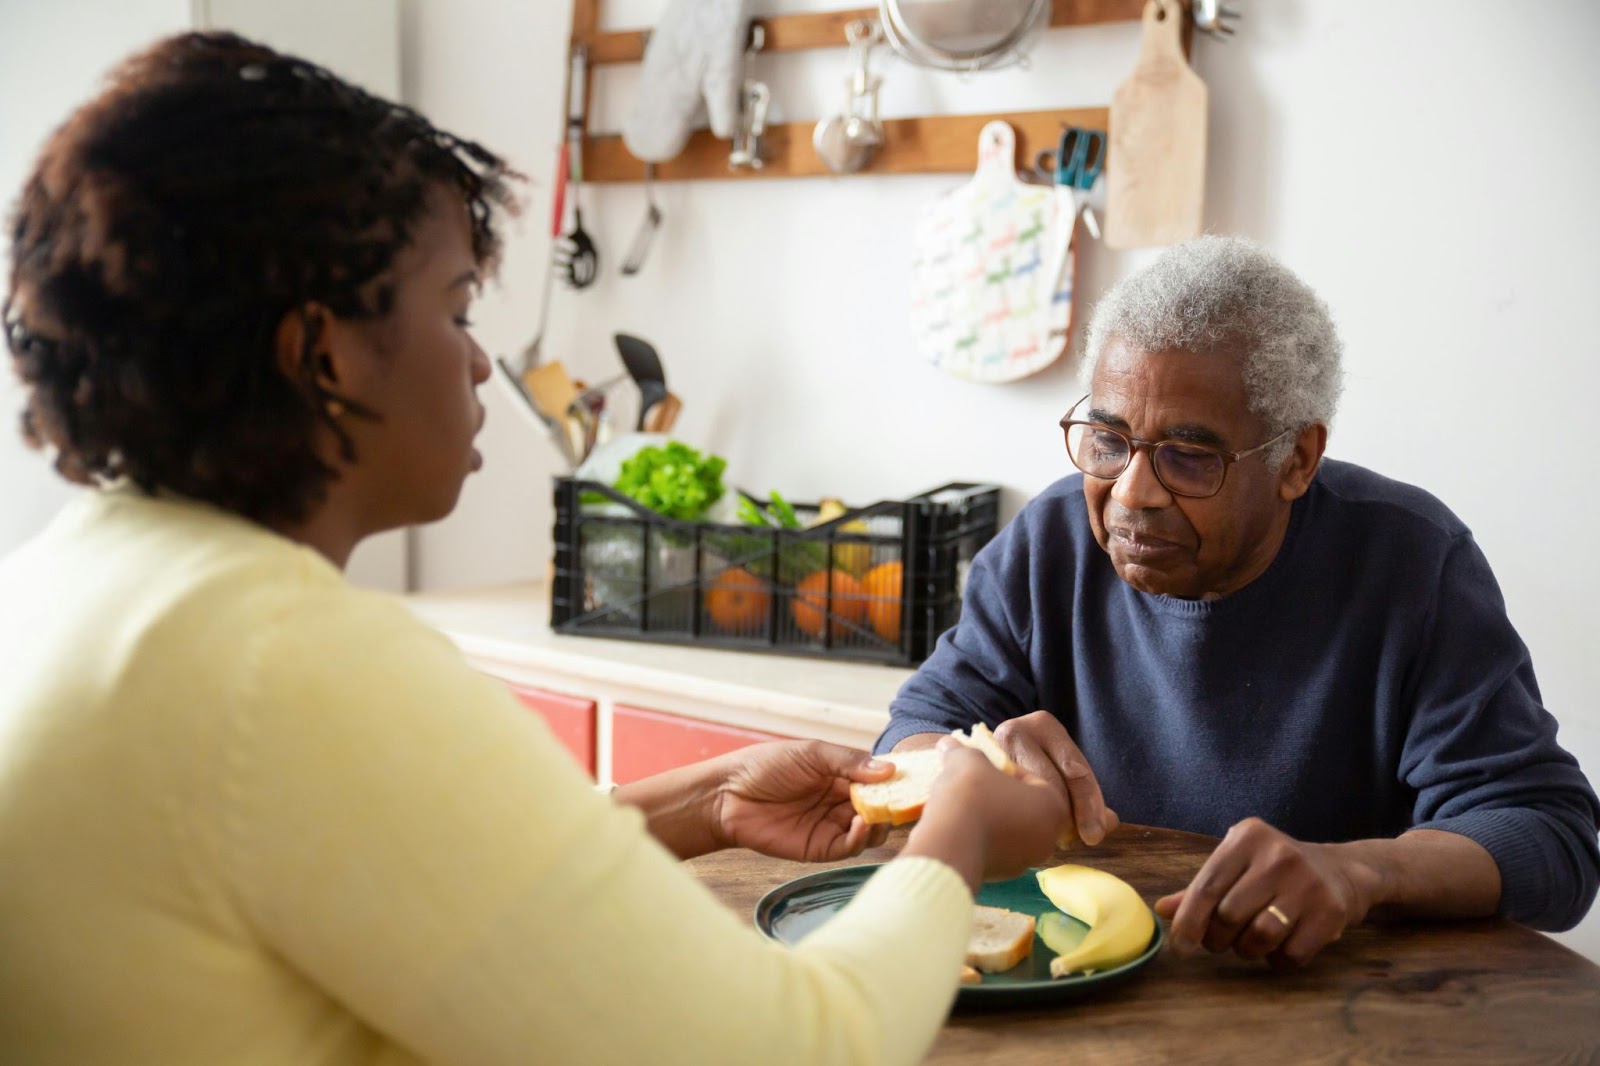 A caregiver helping a senior citizen eat food from a plate in front of them